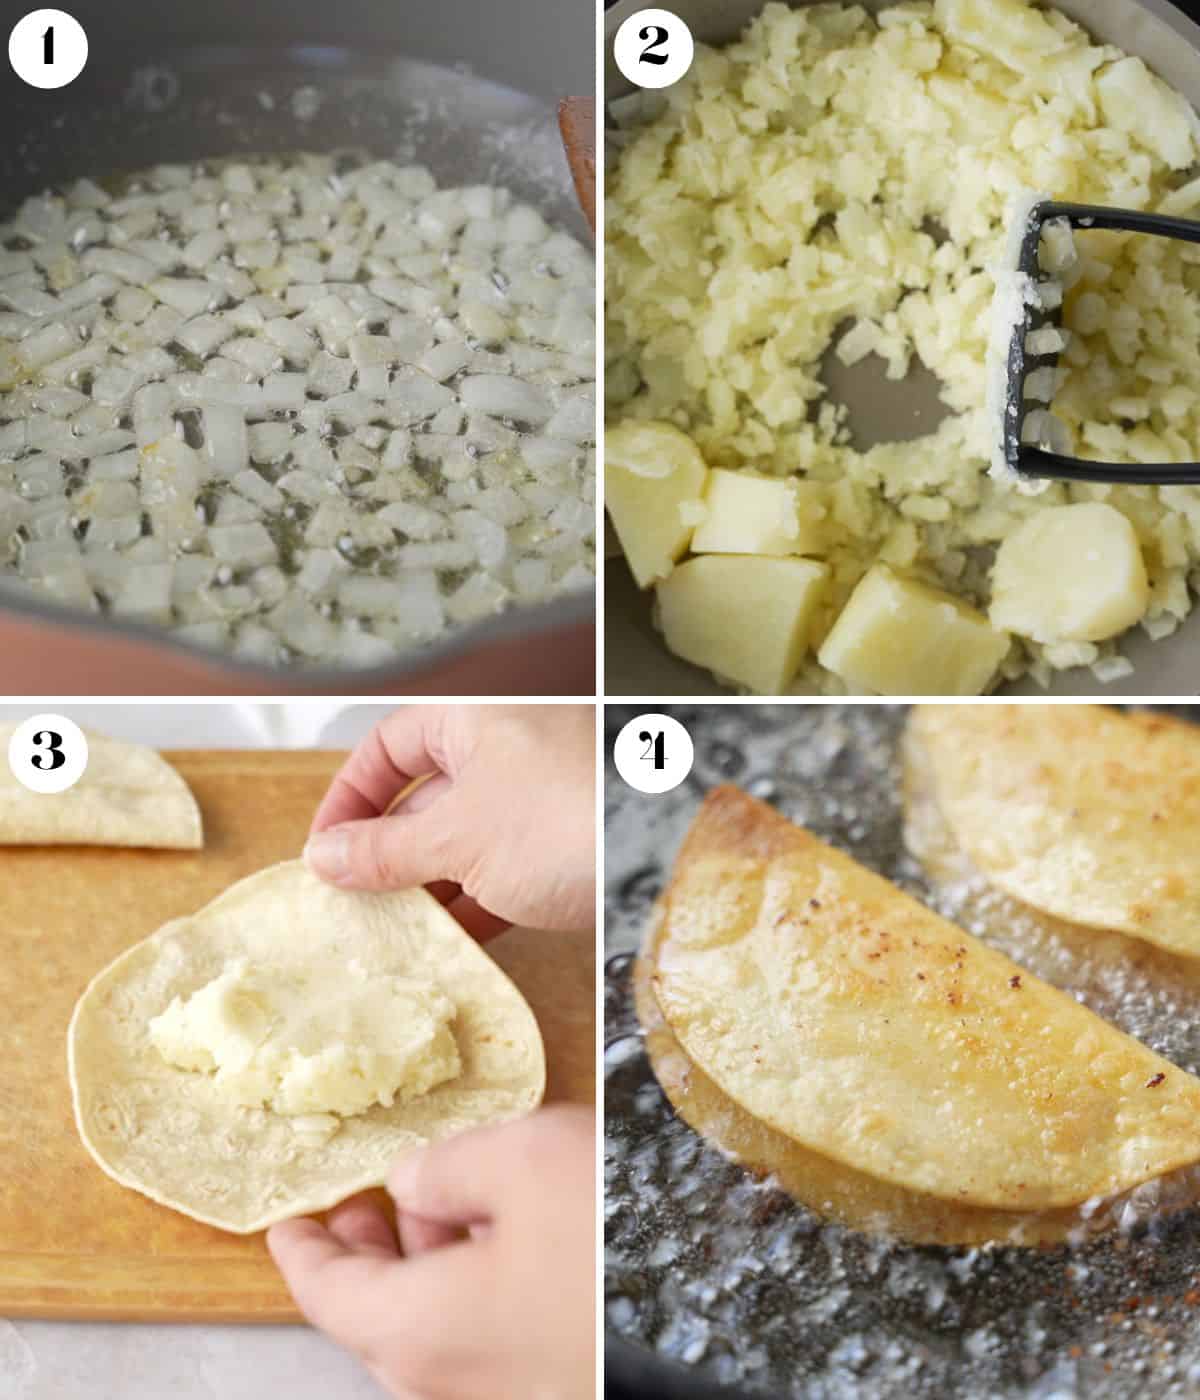 Four image collage showing how to make the fried potato tacos.